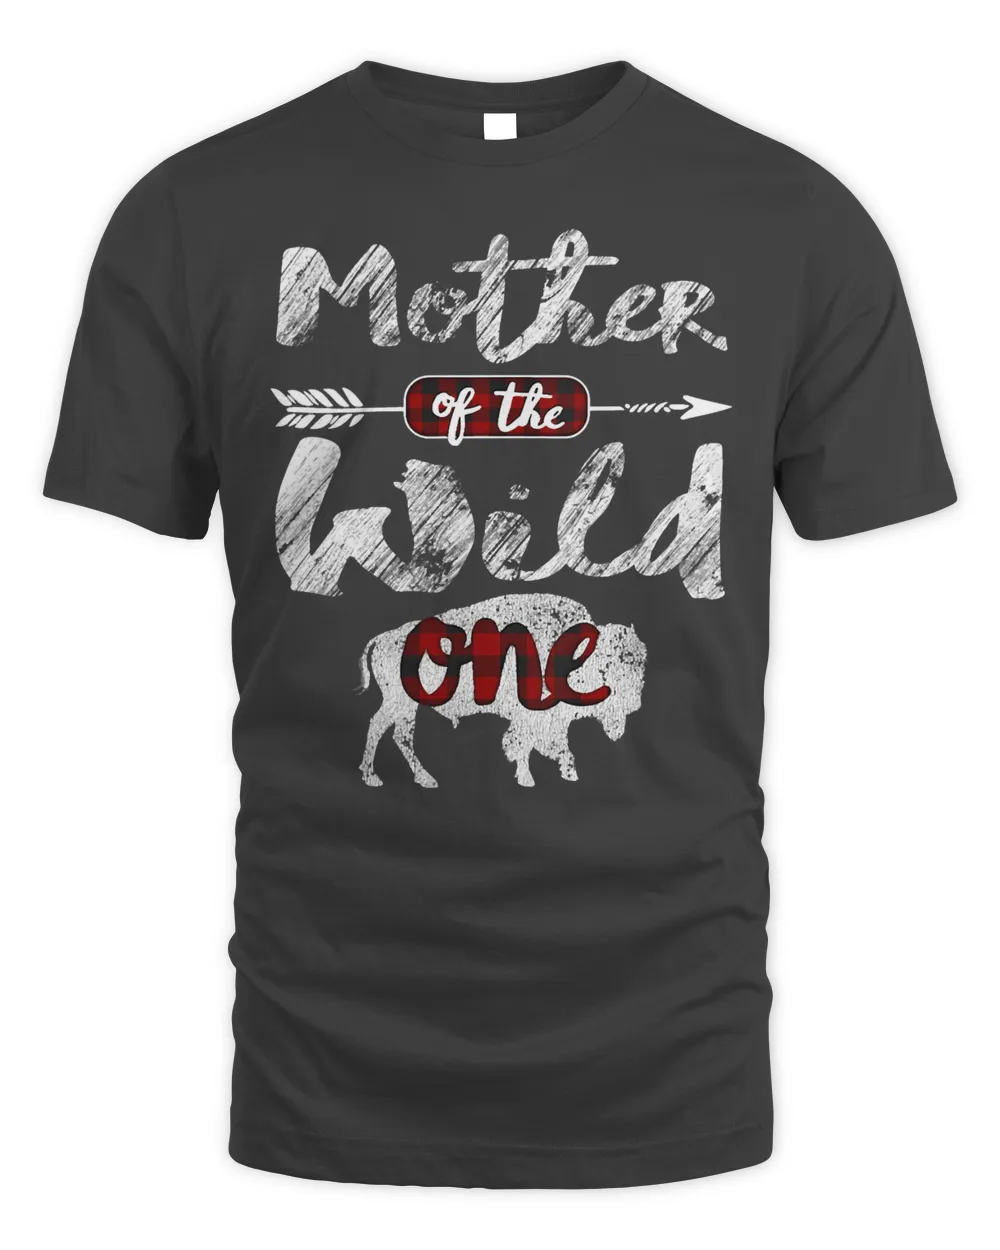 Womens Mother of the Wild One Shirt American Bison Buffalo Plaid V-Neck T-Shirt